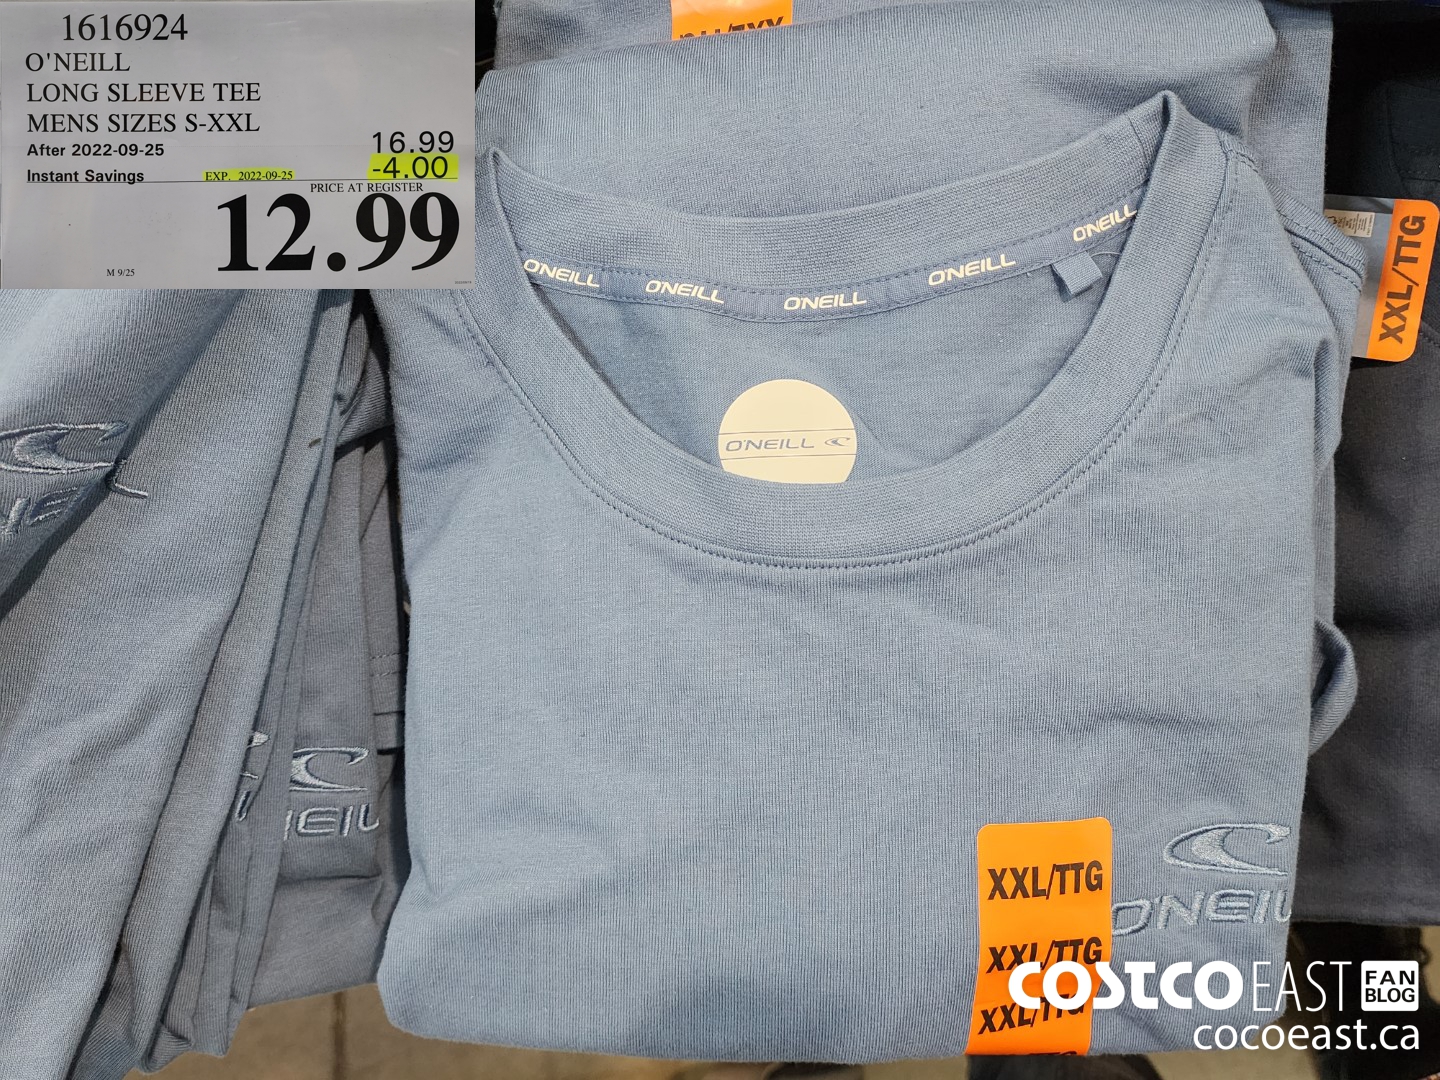 I spotted these 💯% cotton #LuckyBrand t-shirts at my local Costco 🇨🇦  today, $12.99 for one tee. The fabric was really soft! �